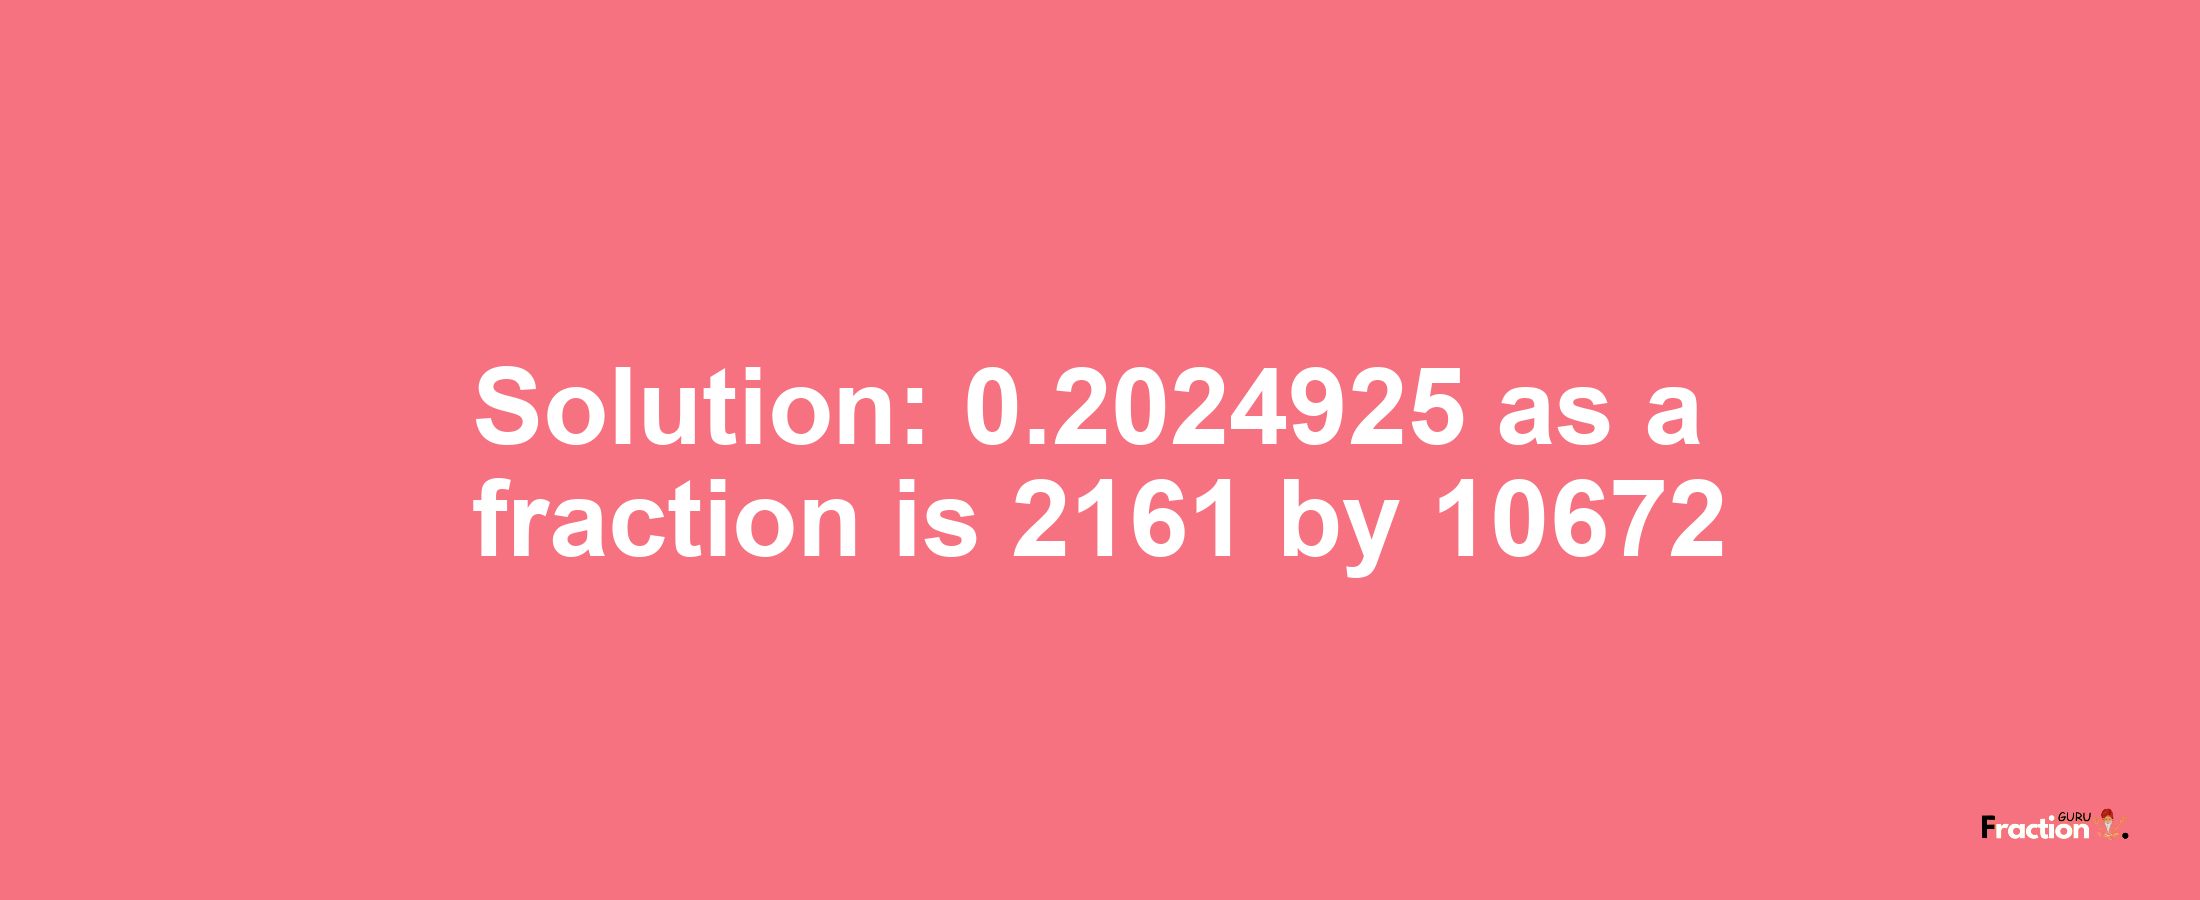 Solution:0.2024925 as a fraction is 2161/10672